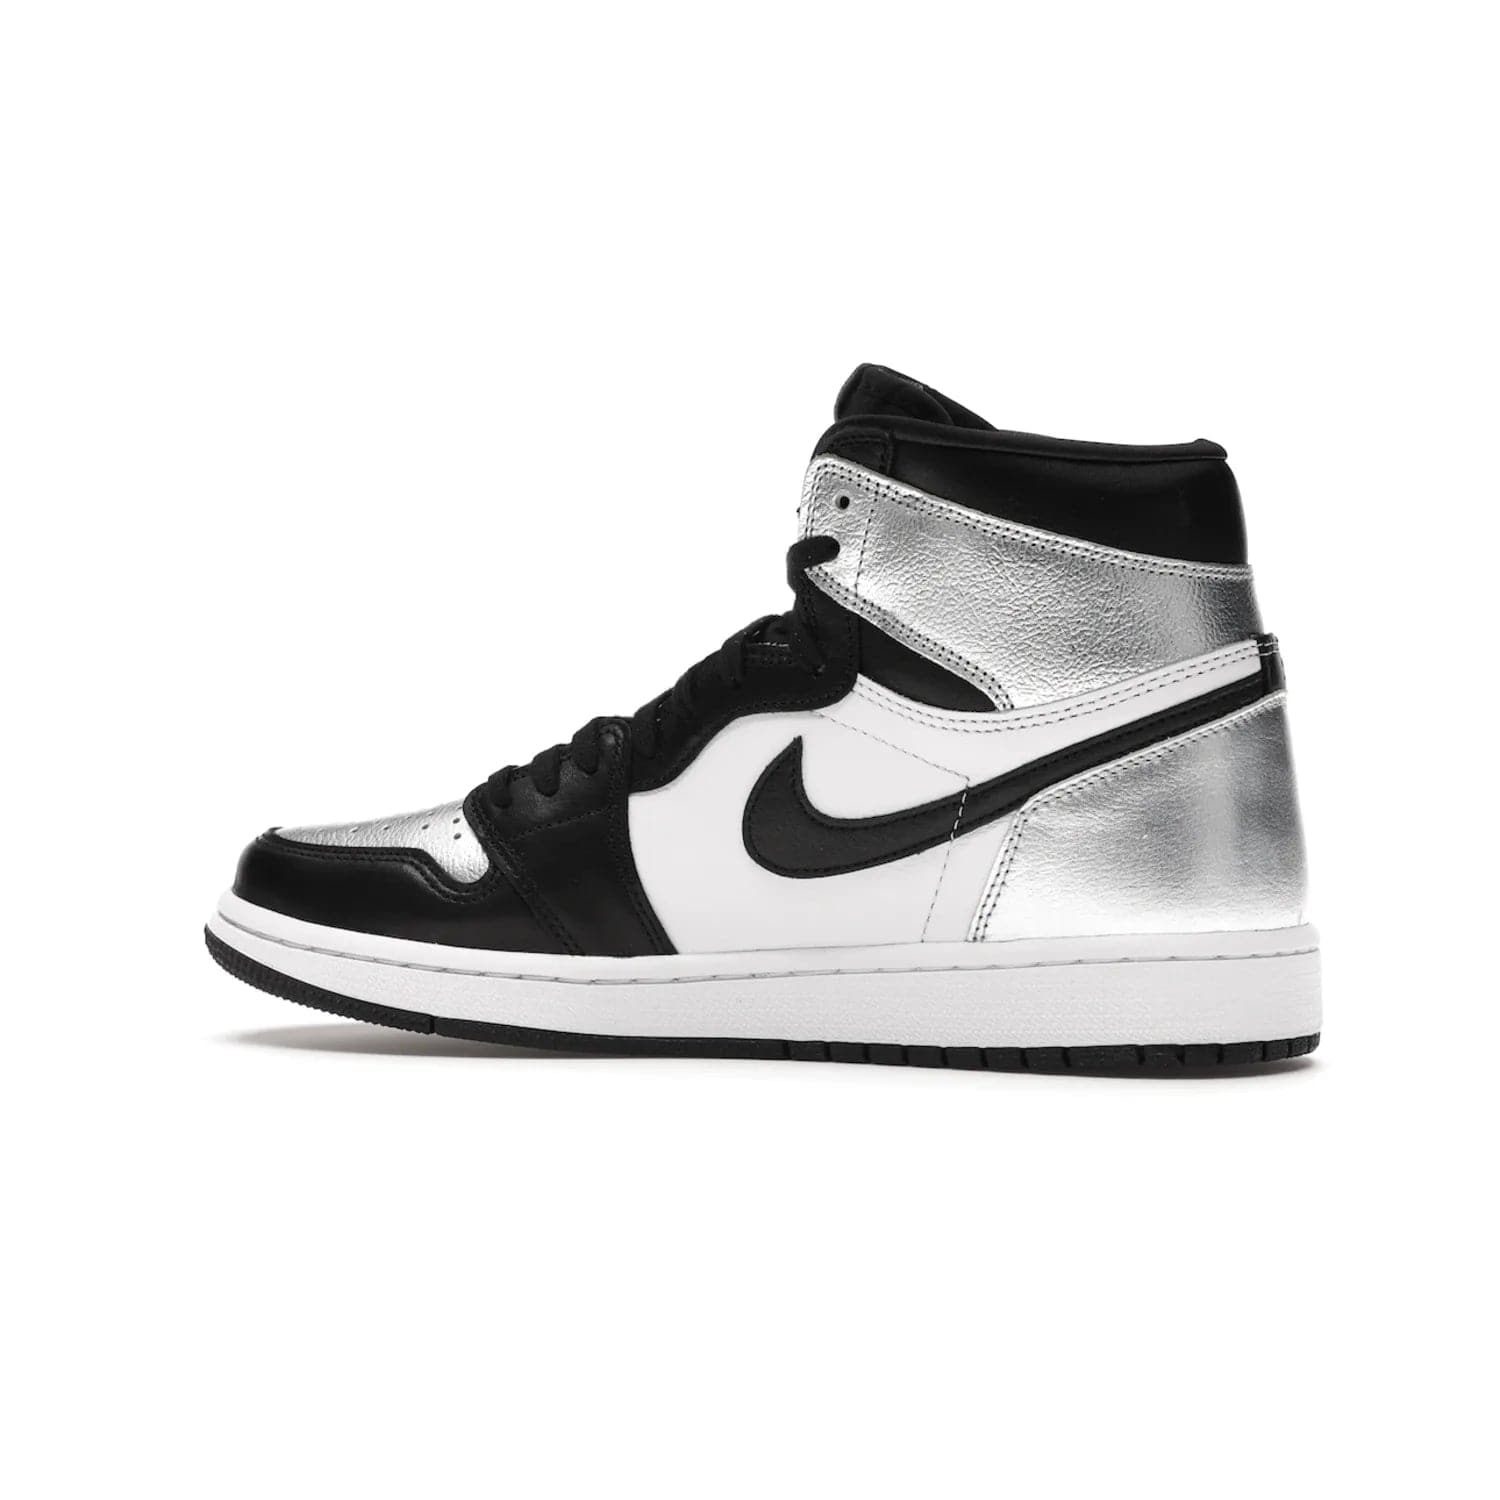 Jordan 1 Retro High Silver Toe (Women's) - Image 21 - Only at www.BallersClubKickz.com - Introducing the Jordan 1 Retro High Silver Toe (Women's): an updated spin on the iconic 'Black Toe' theme. Featuring white & black leather and silver patent leather construction. Nike Air branding, Air Jordan Wings logo, and white/black sole finish give a classic look. The perfect addition to an on-trend streetwear look. Available in classic black & white, this Jordan 1 is an instant classic. Released in February 20